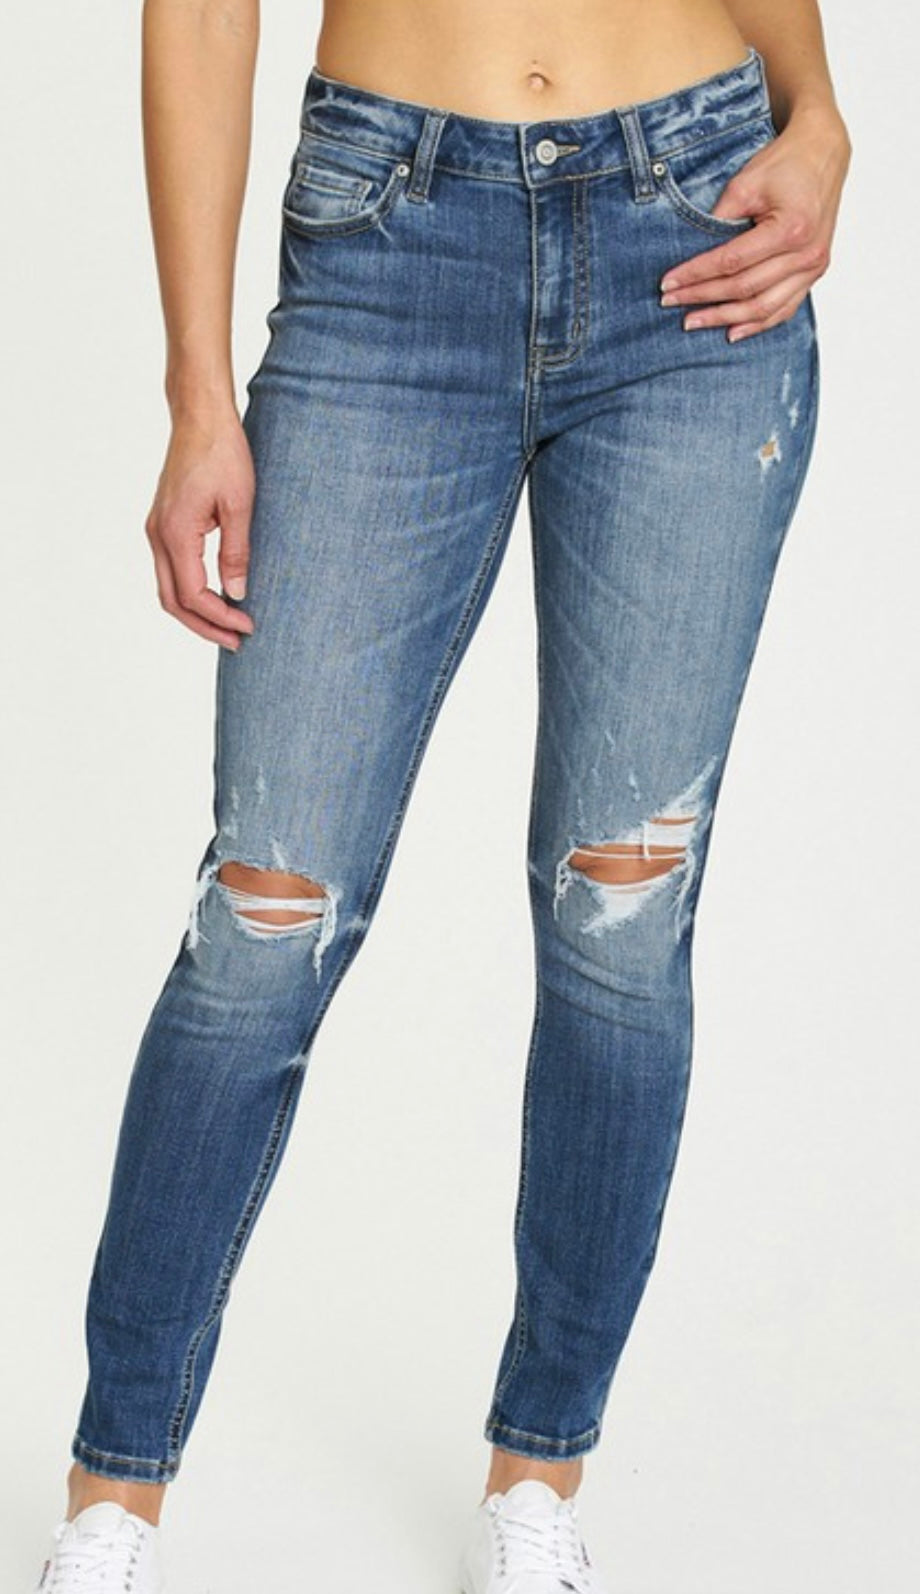 The Isabelle Midrise Jeans